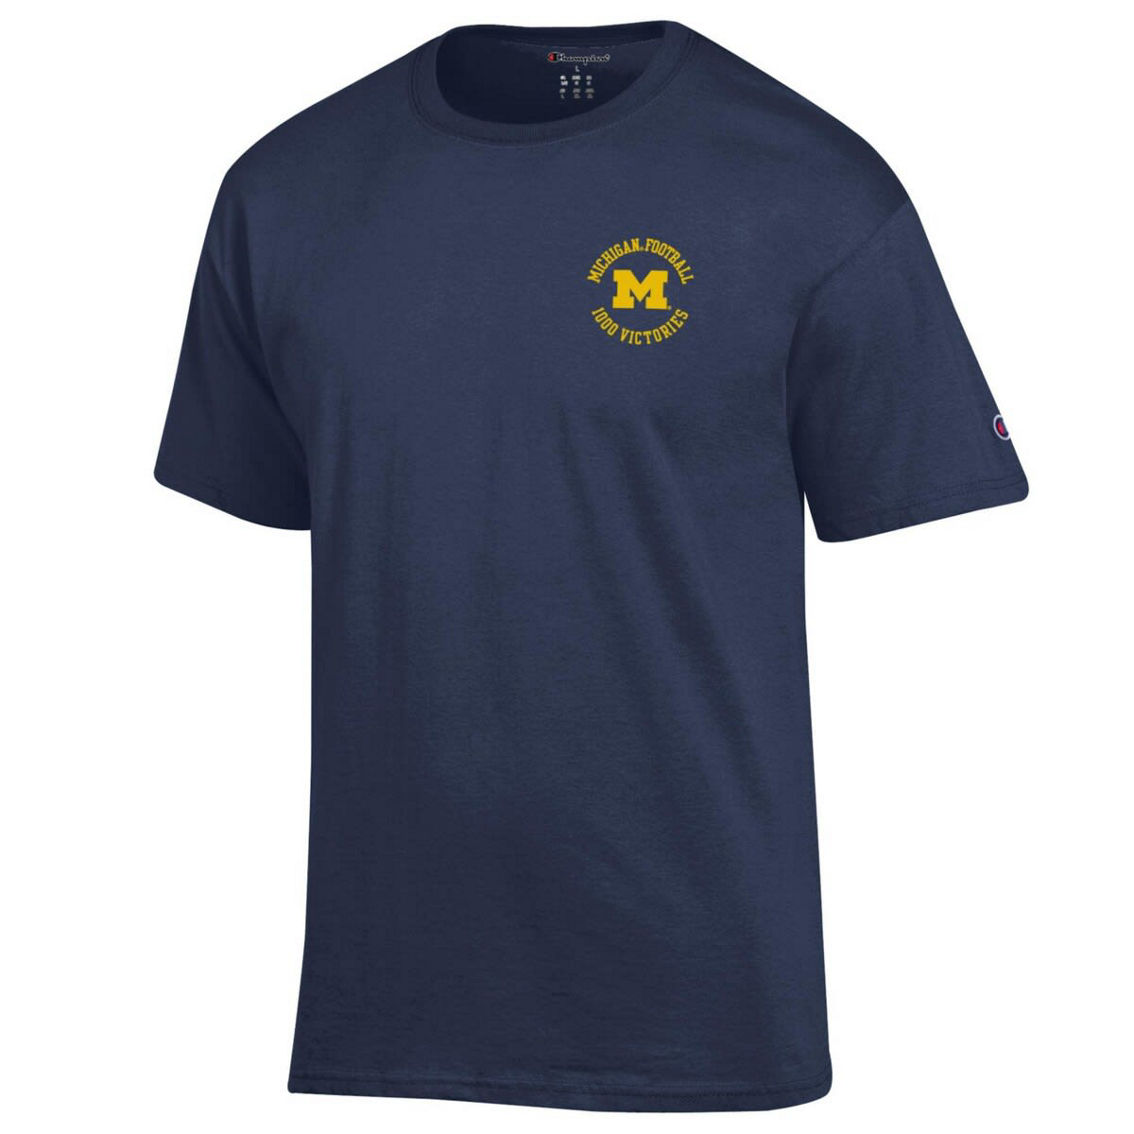 Champion Men's Navy Michigan Wolverines Football All-Time Wins Leader T-Shirt - Image 3 of 4